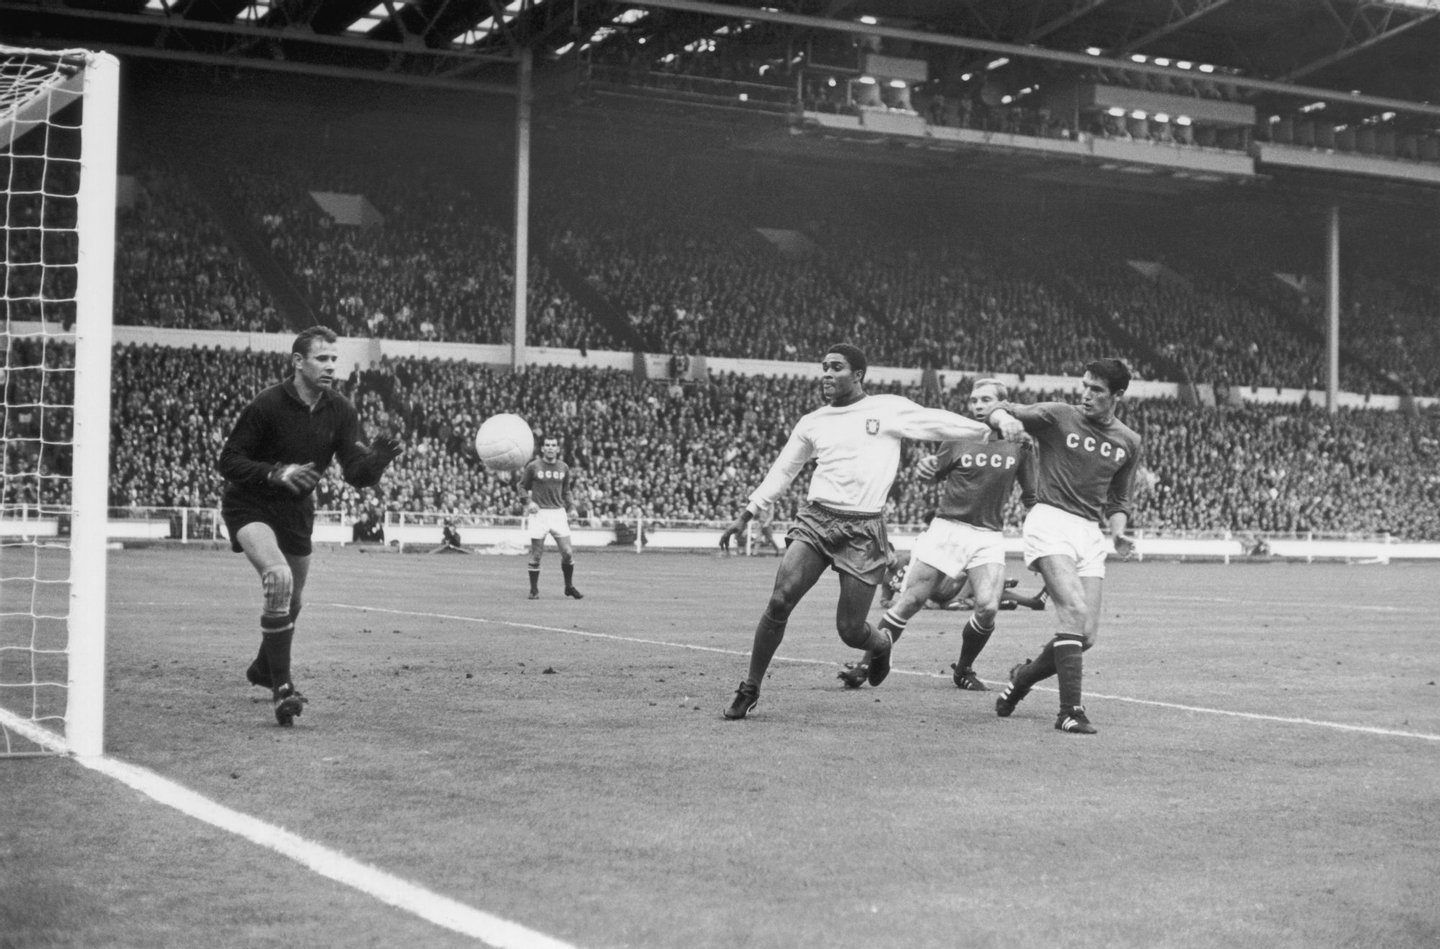 Portugal's Eusebio forces his way between two Russian players, only to see his shot saved by Russian goalkeeper Lev Yashin, during the World Cup match at Wembley Stadium, 28th July 1966. Portugal beat Russia 2-1. (Photo by Keystone/Hulton Archive/Getty Images)